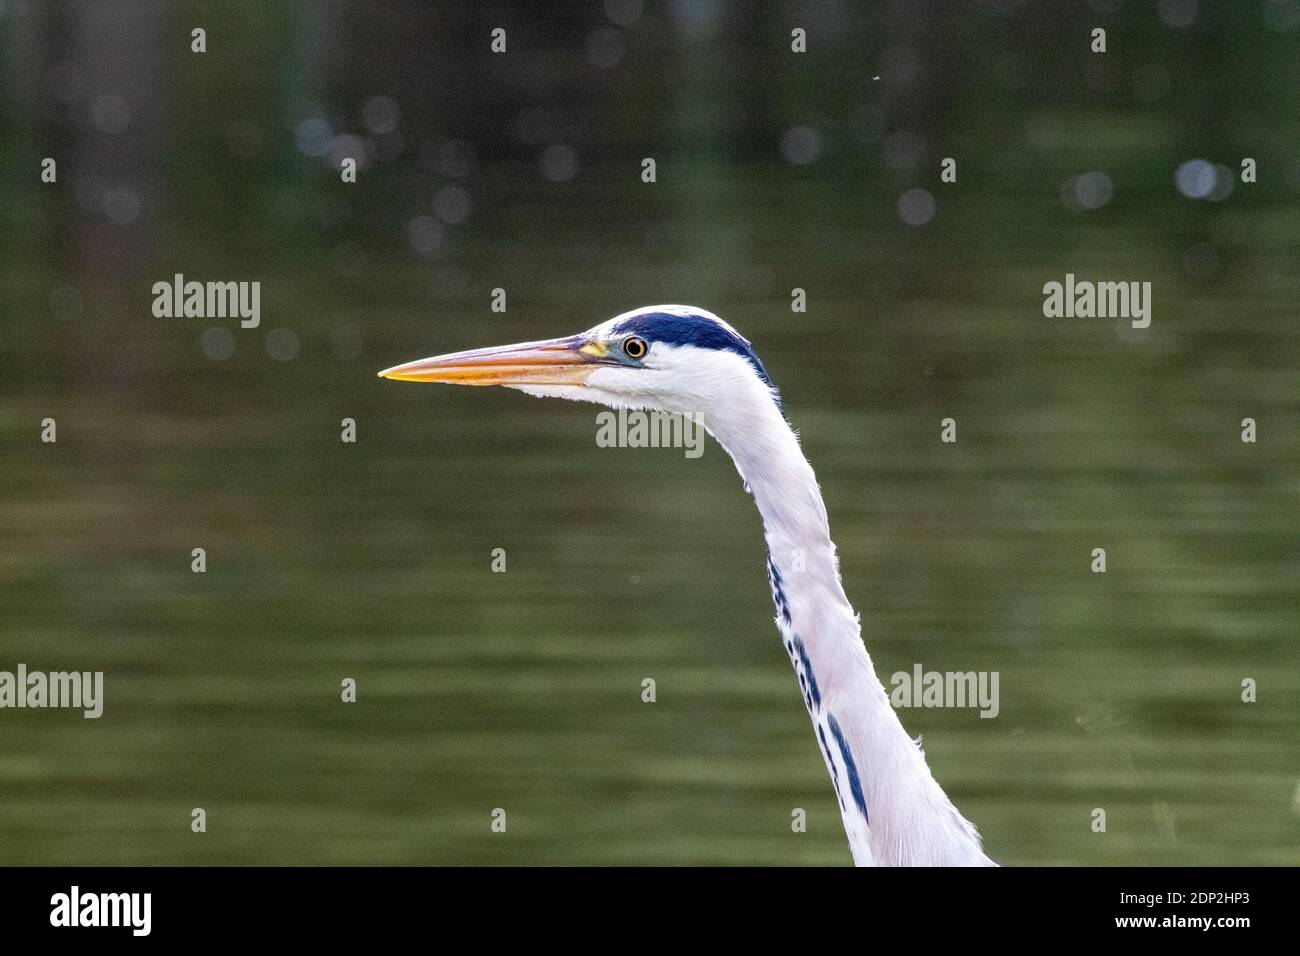 Portrait of a Heron taken on a canal back in the summer Stock Photo